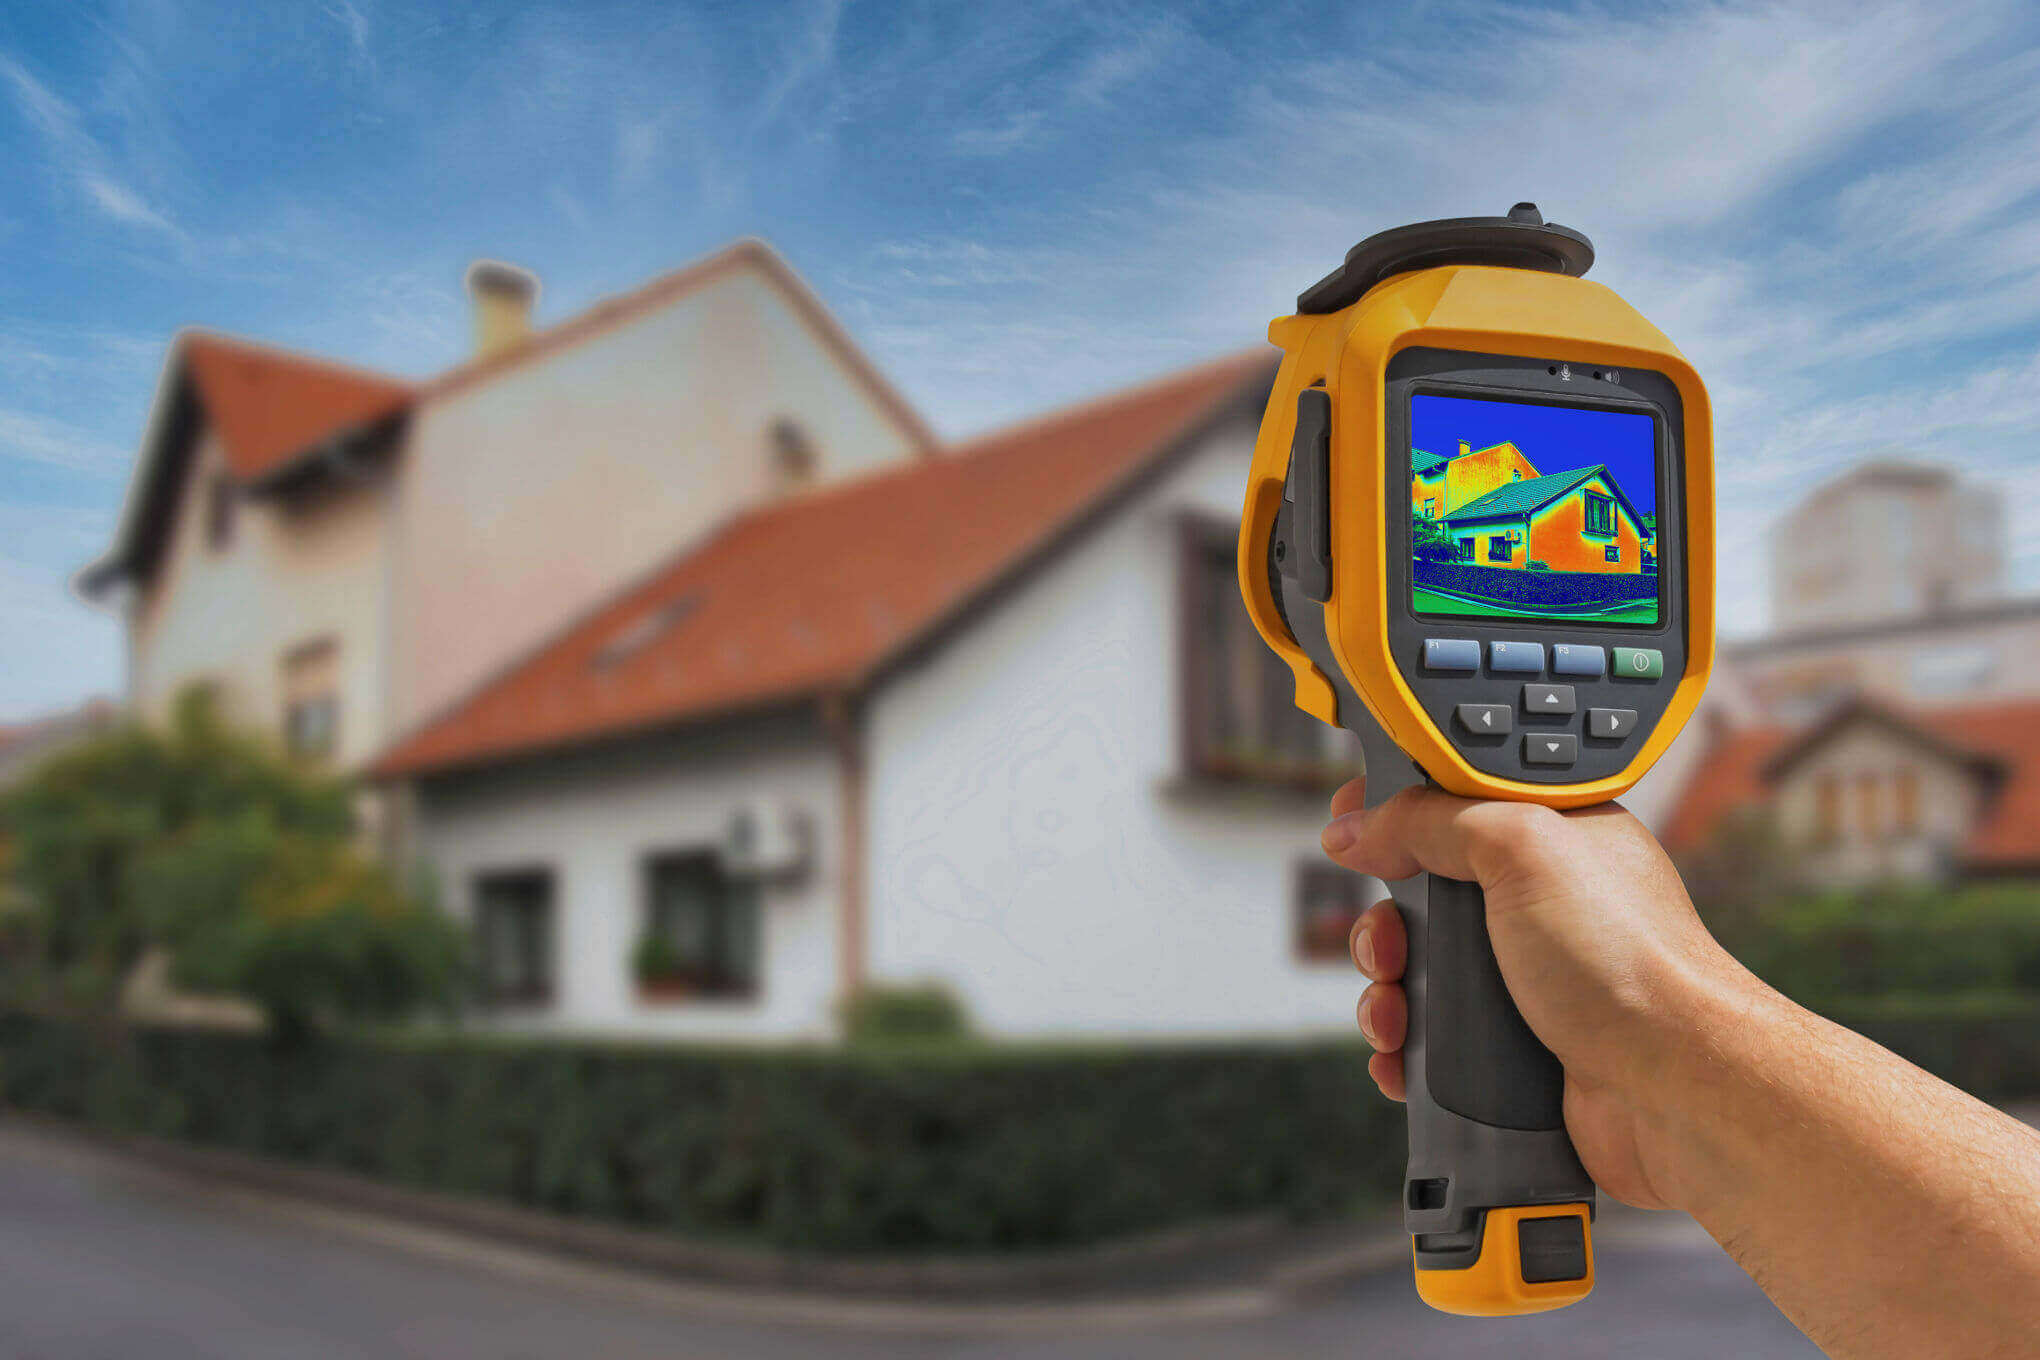 Image of a Thermal Imaging survey